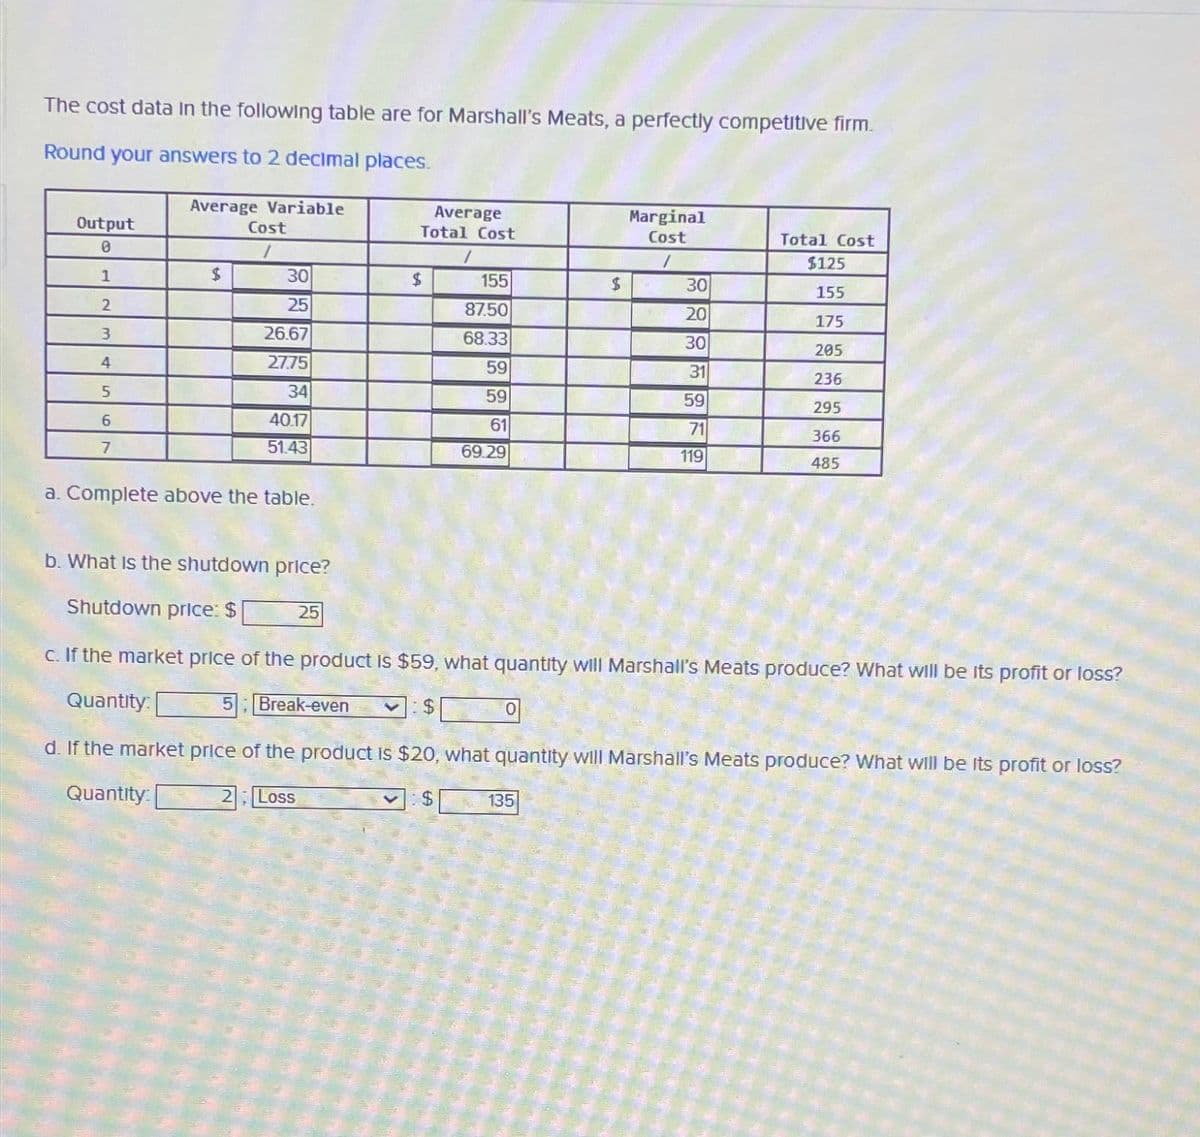 The cost data in the following table are for Marshall's Meats, a perfectly competitive firm.
Round your answers to 2 decimal places.
Average Variable
Average
Total Cost
Marginal
Cost
Output
0
Cost
Total Cost
$125
1
$
30
$
155
$
30
155
2
25
87.50
20
175
3
26.67
68.33
30
205
4
27.75
59
31
236
5
34
59
59
295
6
40.17
61
71
366
7
51.43
69.29
119
485
a. Complete above the table.
b. What is the shutdown price?
Shutdown price: $
25
c. If the market price of the product is $59, what quantity will Marshall's Meats produce? What will be its profit or loss?
Quantity:
Break-even V $
0
d. If the market price of the product is $20, what quantity will Marshall's Meats produce? What will be its profit or loss?
Quantity:
2 Loss
$
135